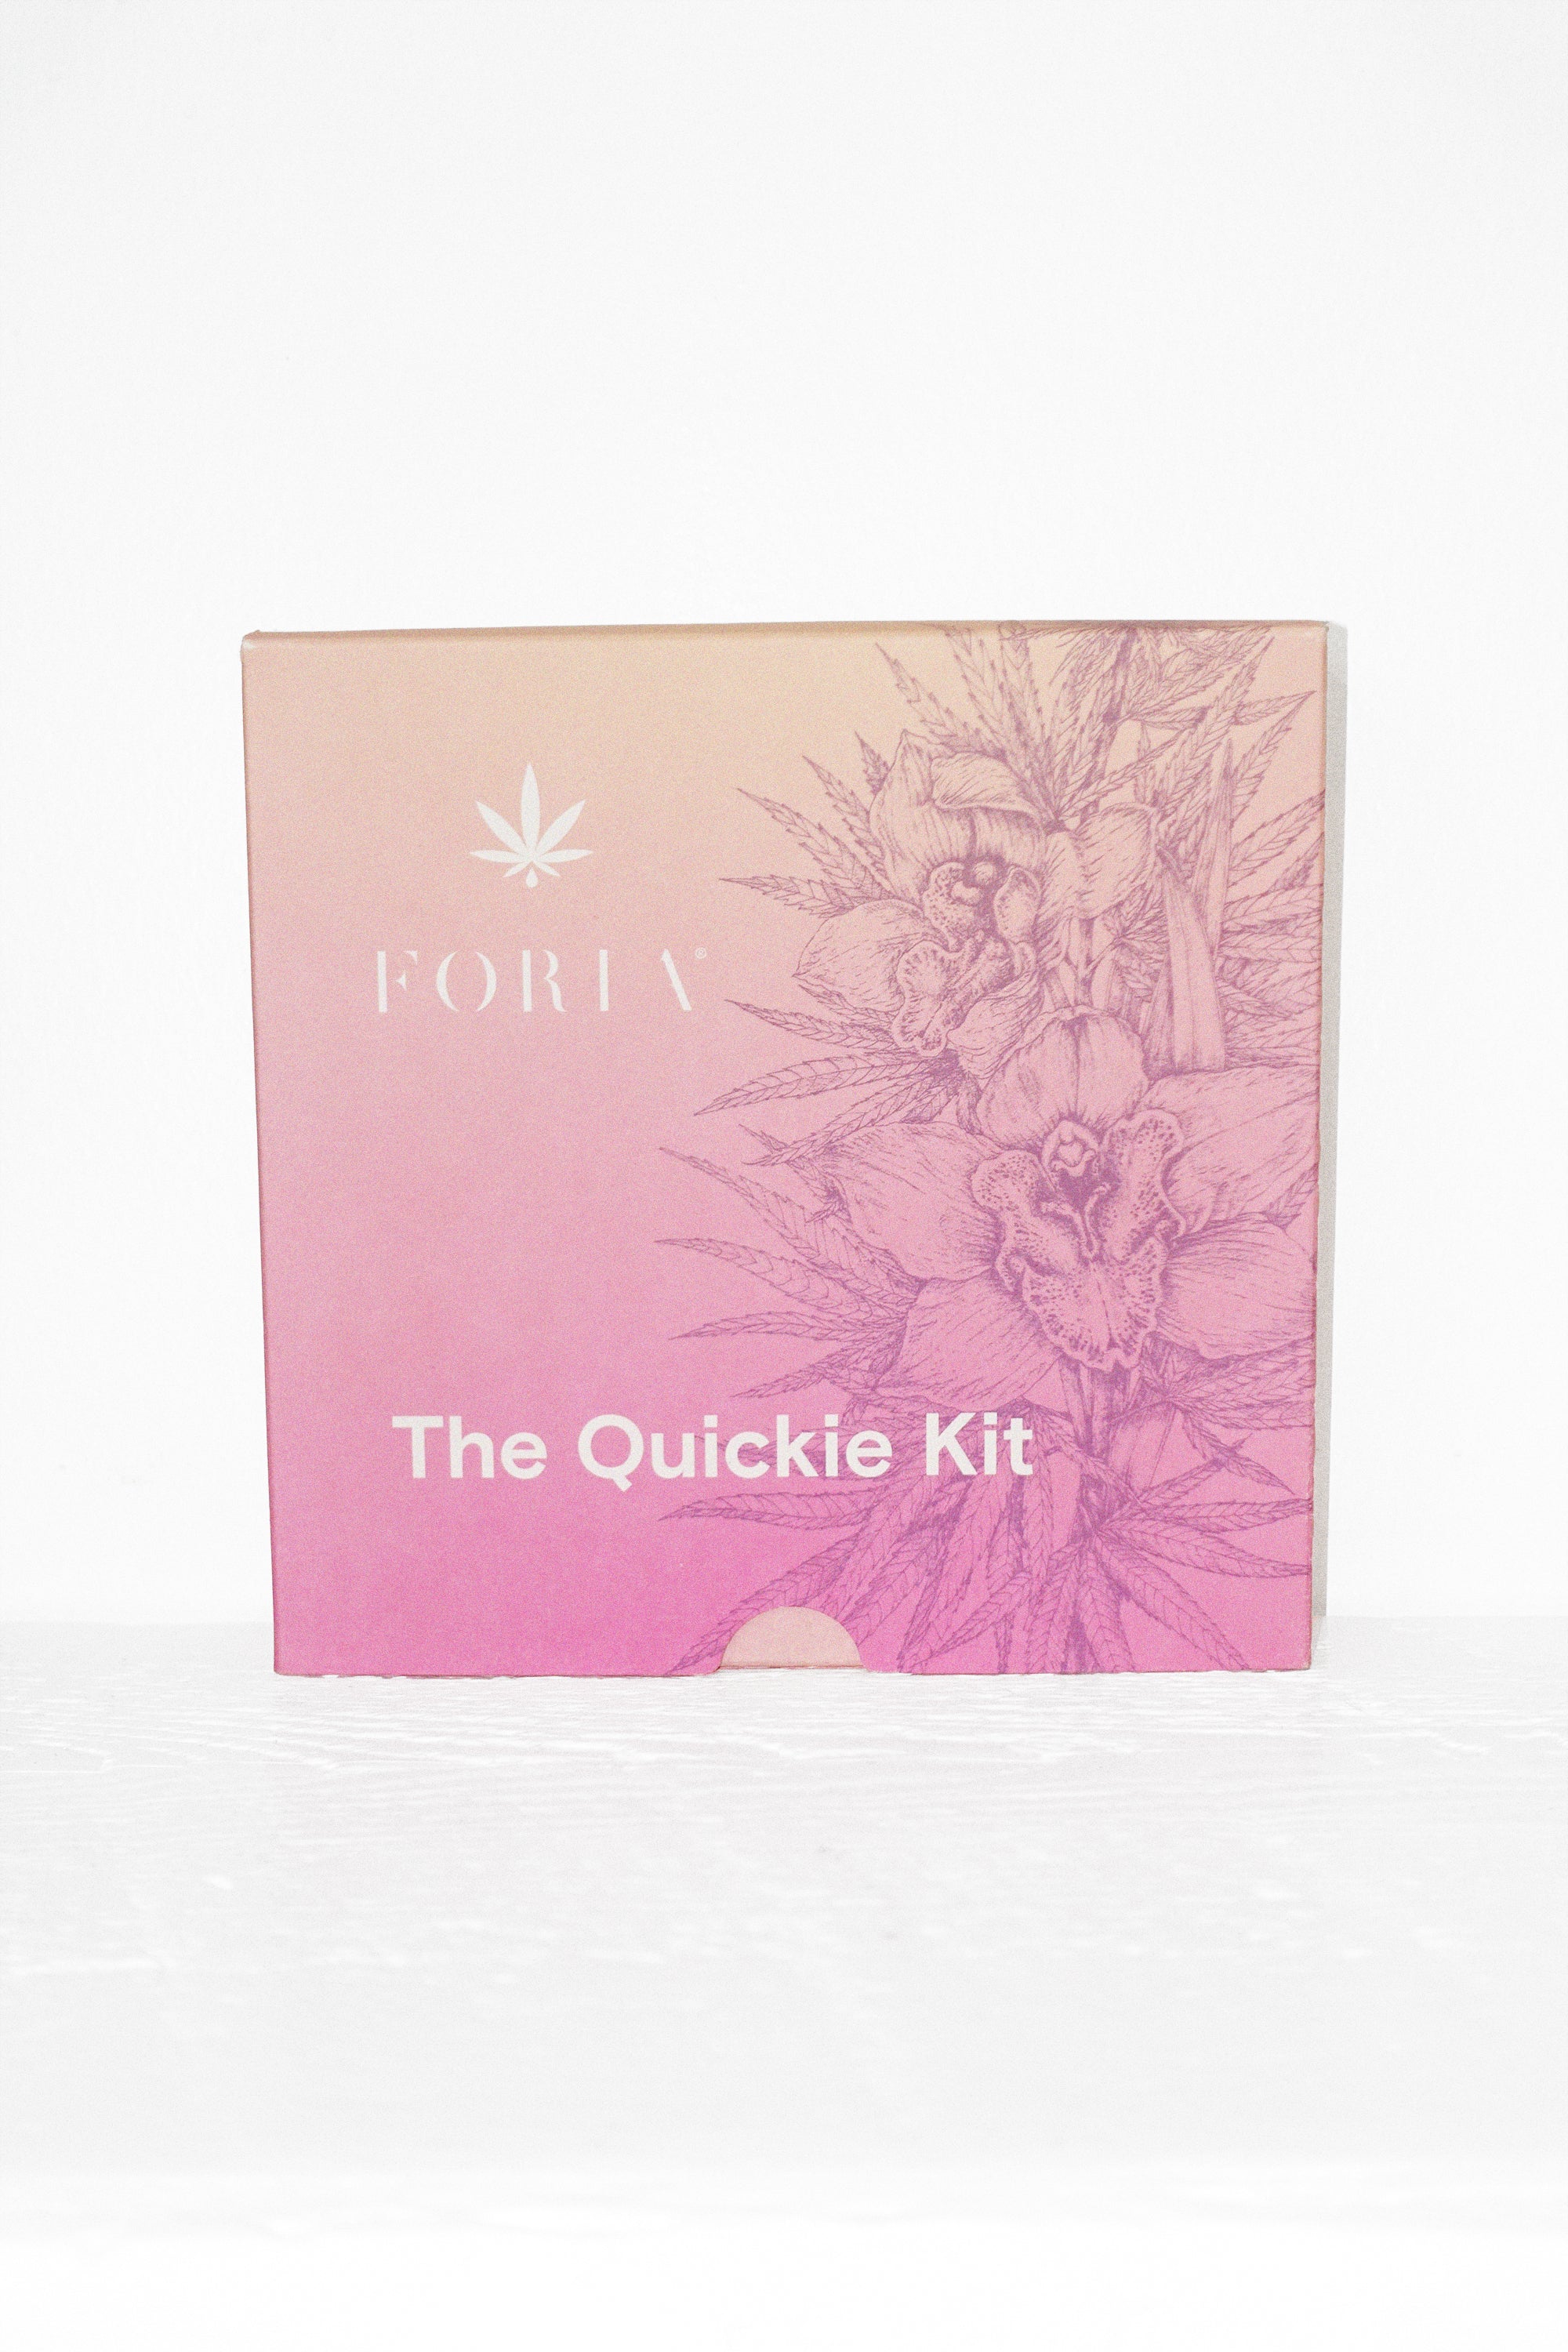 Quickie Kit by Foria